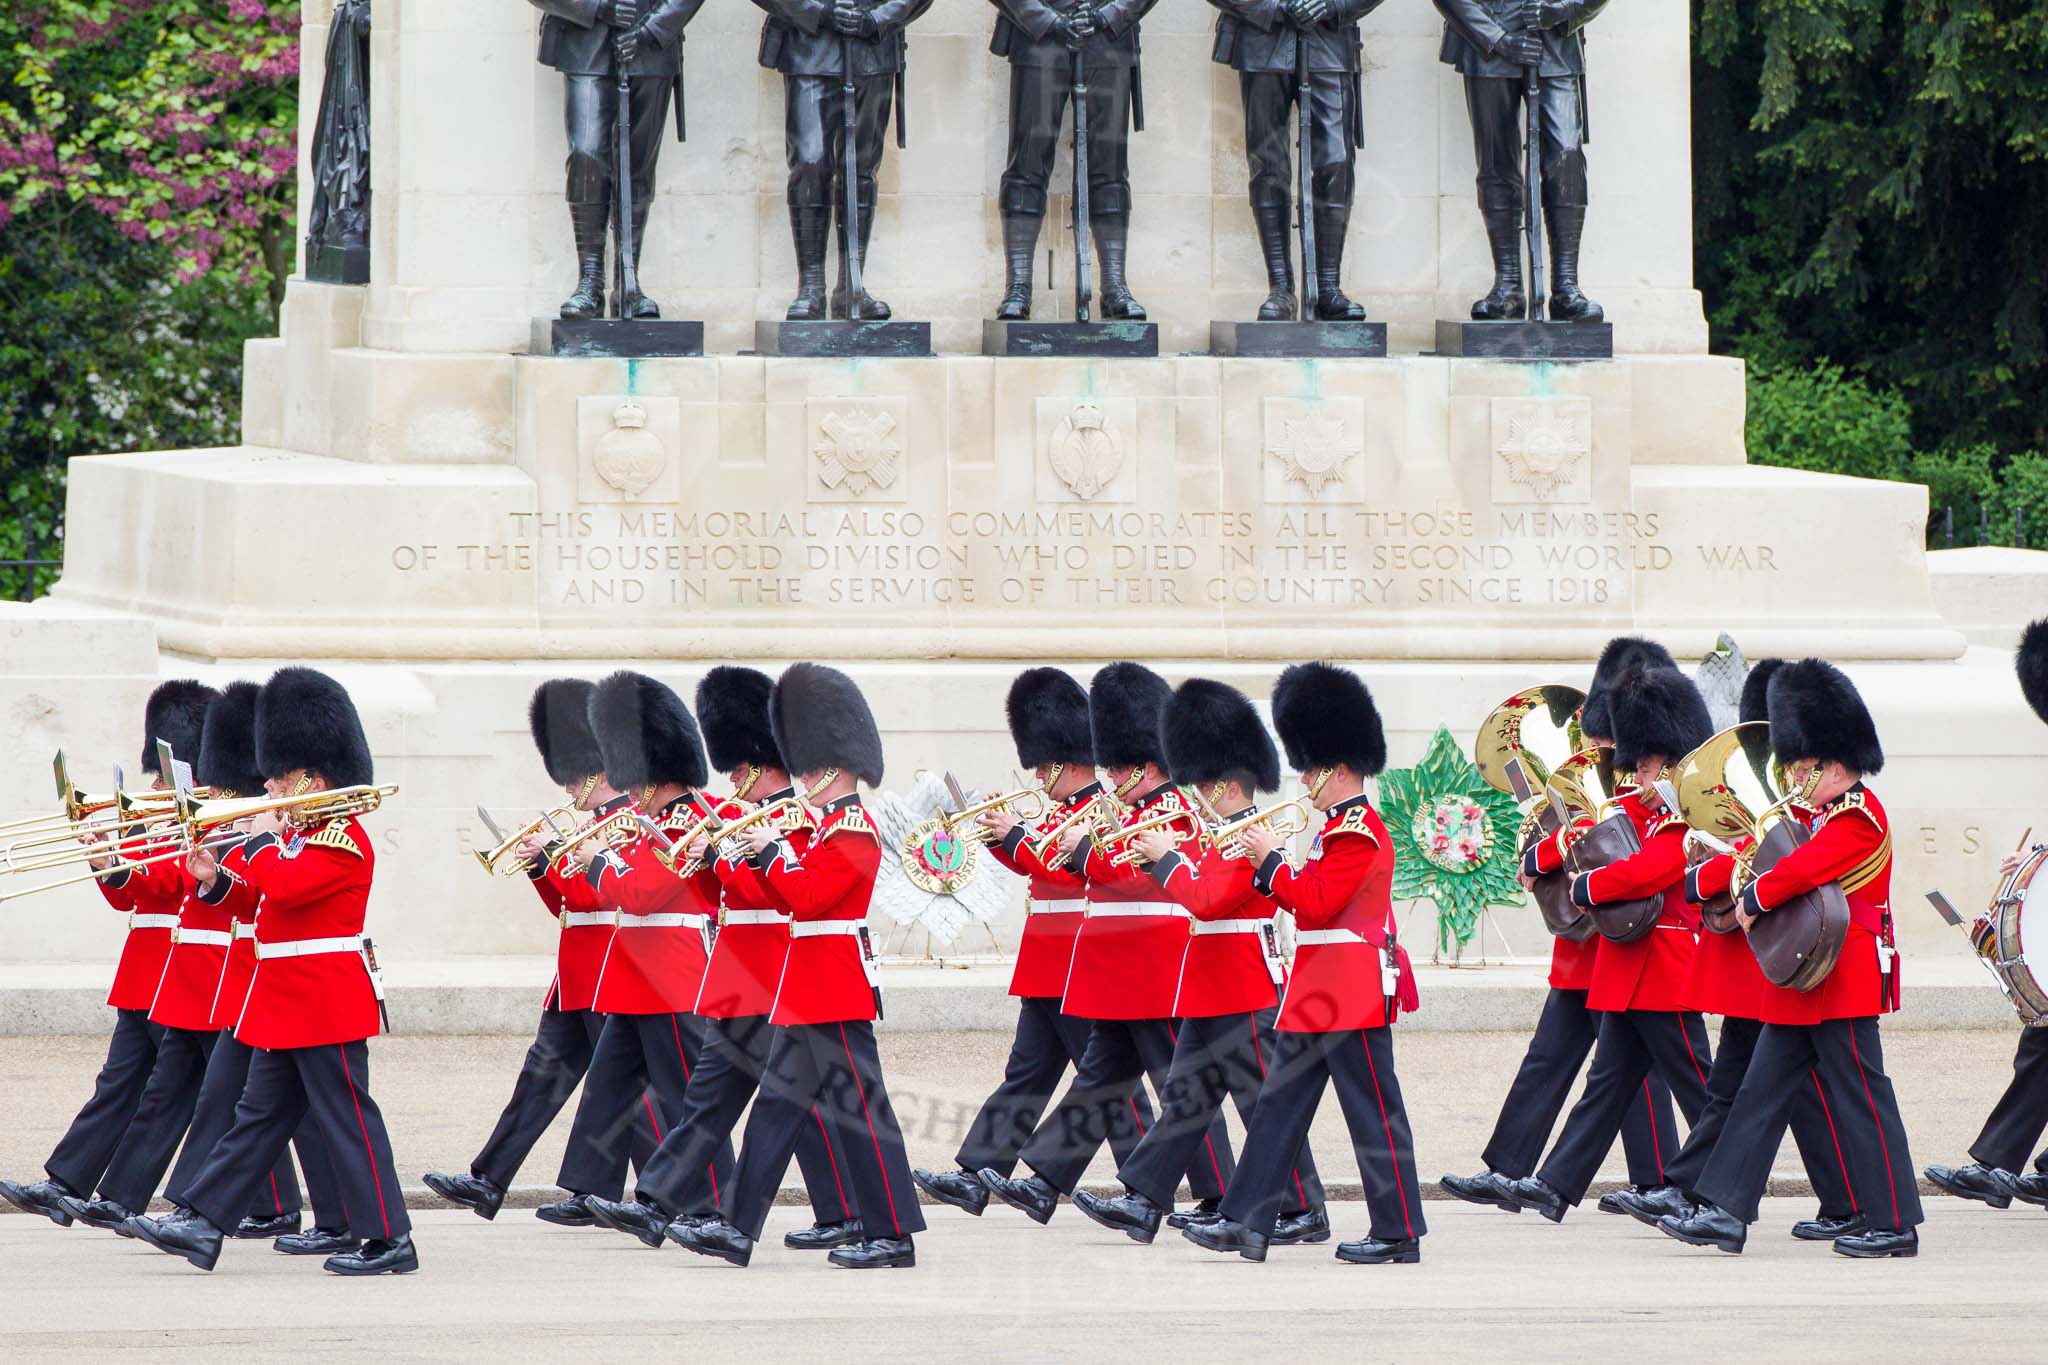 Major General's Review 2013: Musicians of the Band of the Irish Guards..
Horse Guards Parade, Westminster,
London SW1,

United Kingdom,
on 01 June 2013 at 10:16, image #59